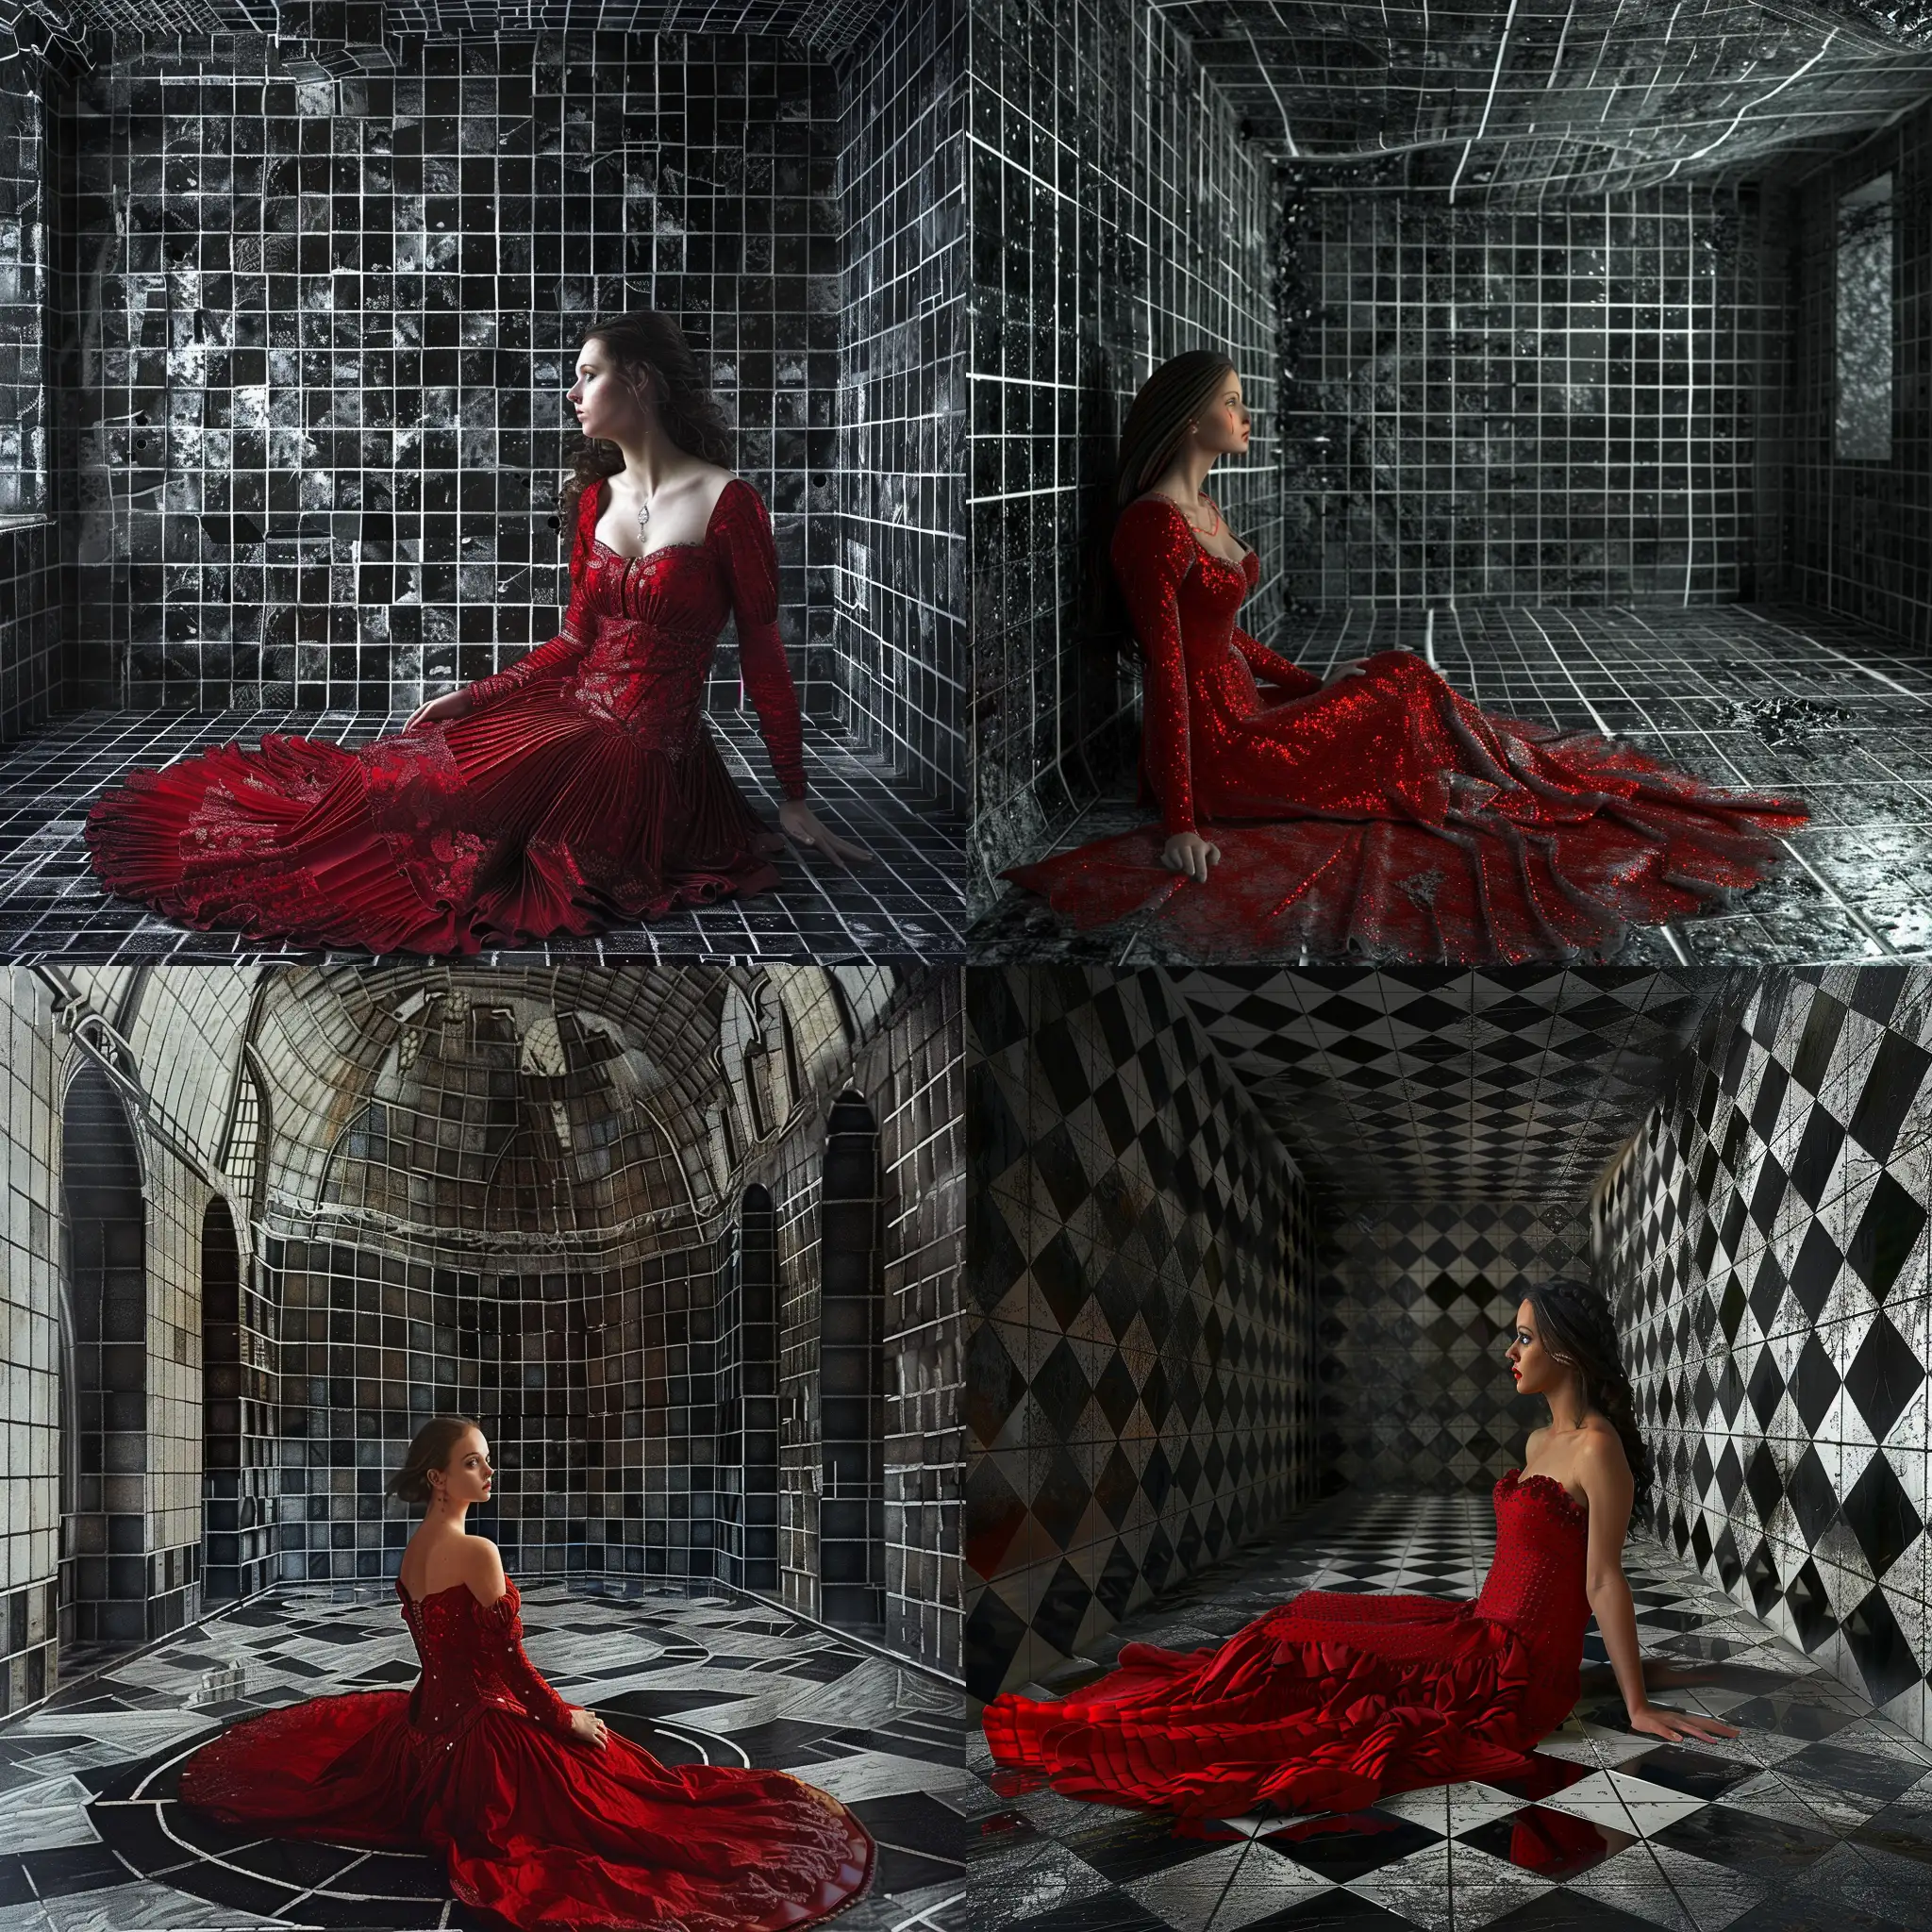 A highly detailed image of a beautiful medieval woman in a  red dress sitting on the floor in a black and white tiled room. The walls and ceiling are also black and white tiled. . Beautiful magical mysterious fantasy surreal highly detailed  